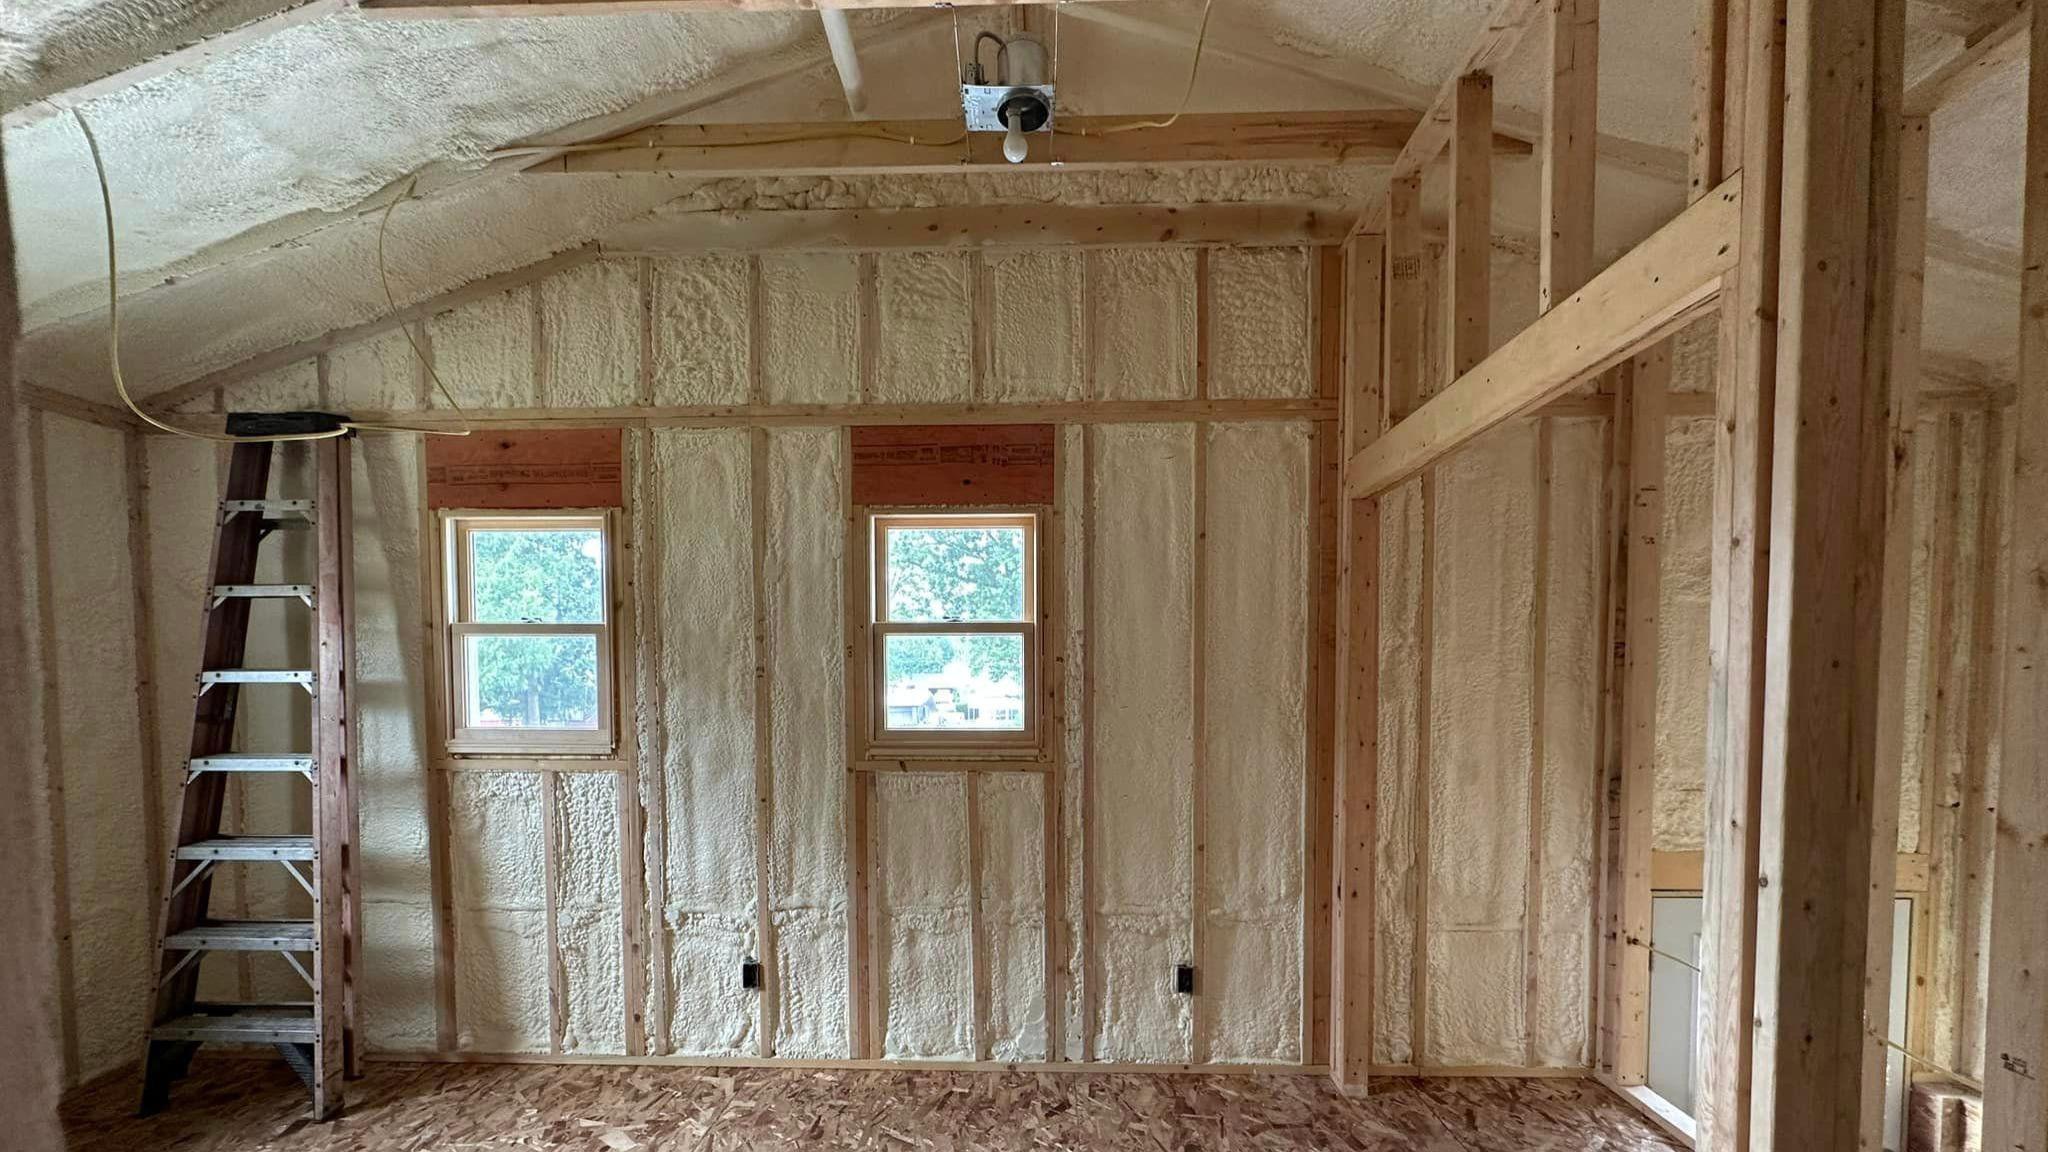 Experience superior insulation with Elite Spray Foam Solutions LLC's spray foam services. Our owner takes pride in delivering precise and efficient spray foam applications that provide optimal thermal performance and air sealing benefits, helping you achieve a more comfortable and energy-efficient indoor environment.